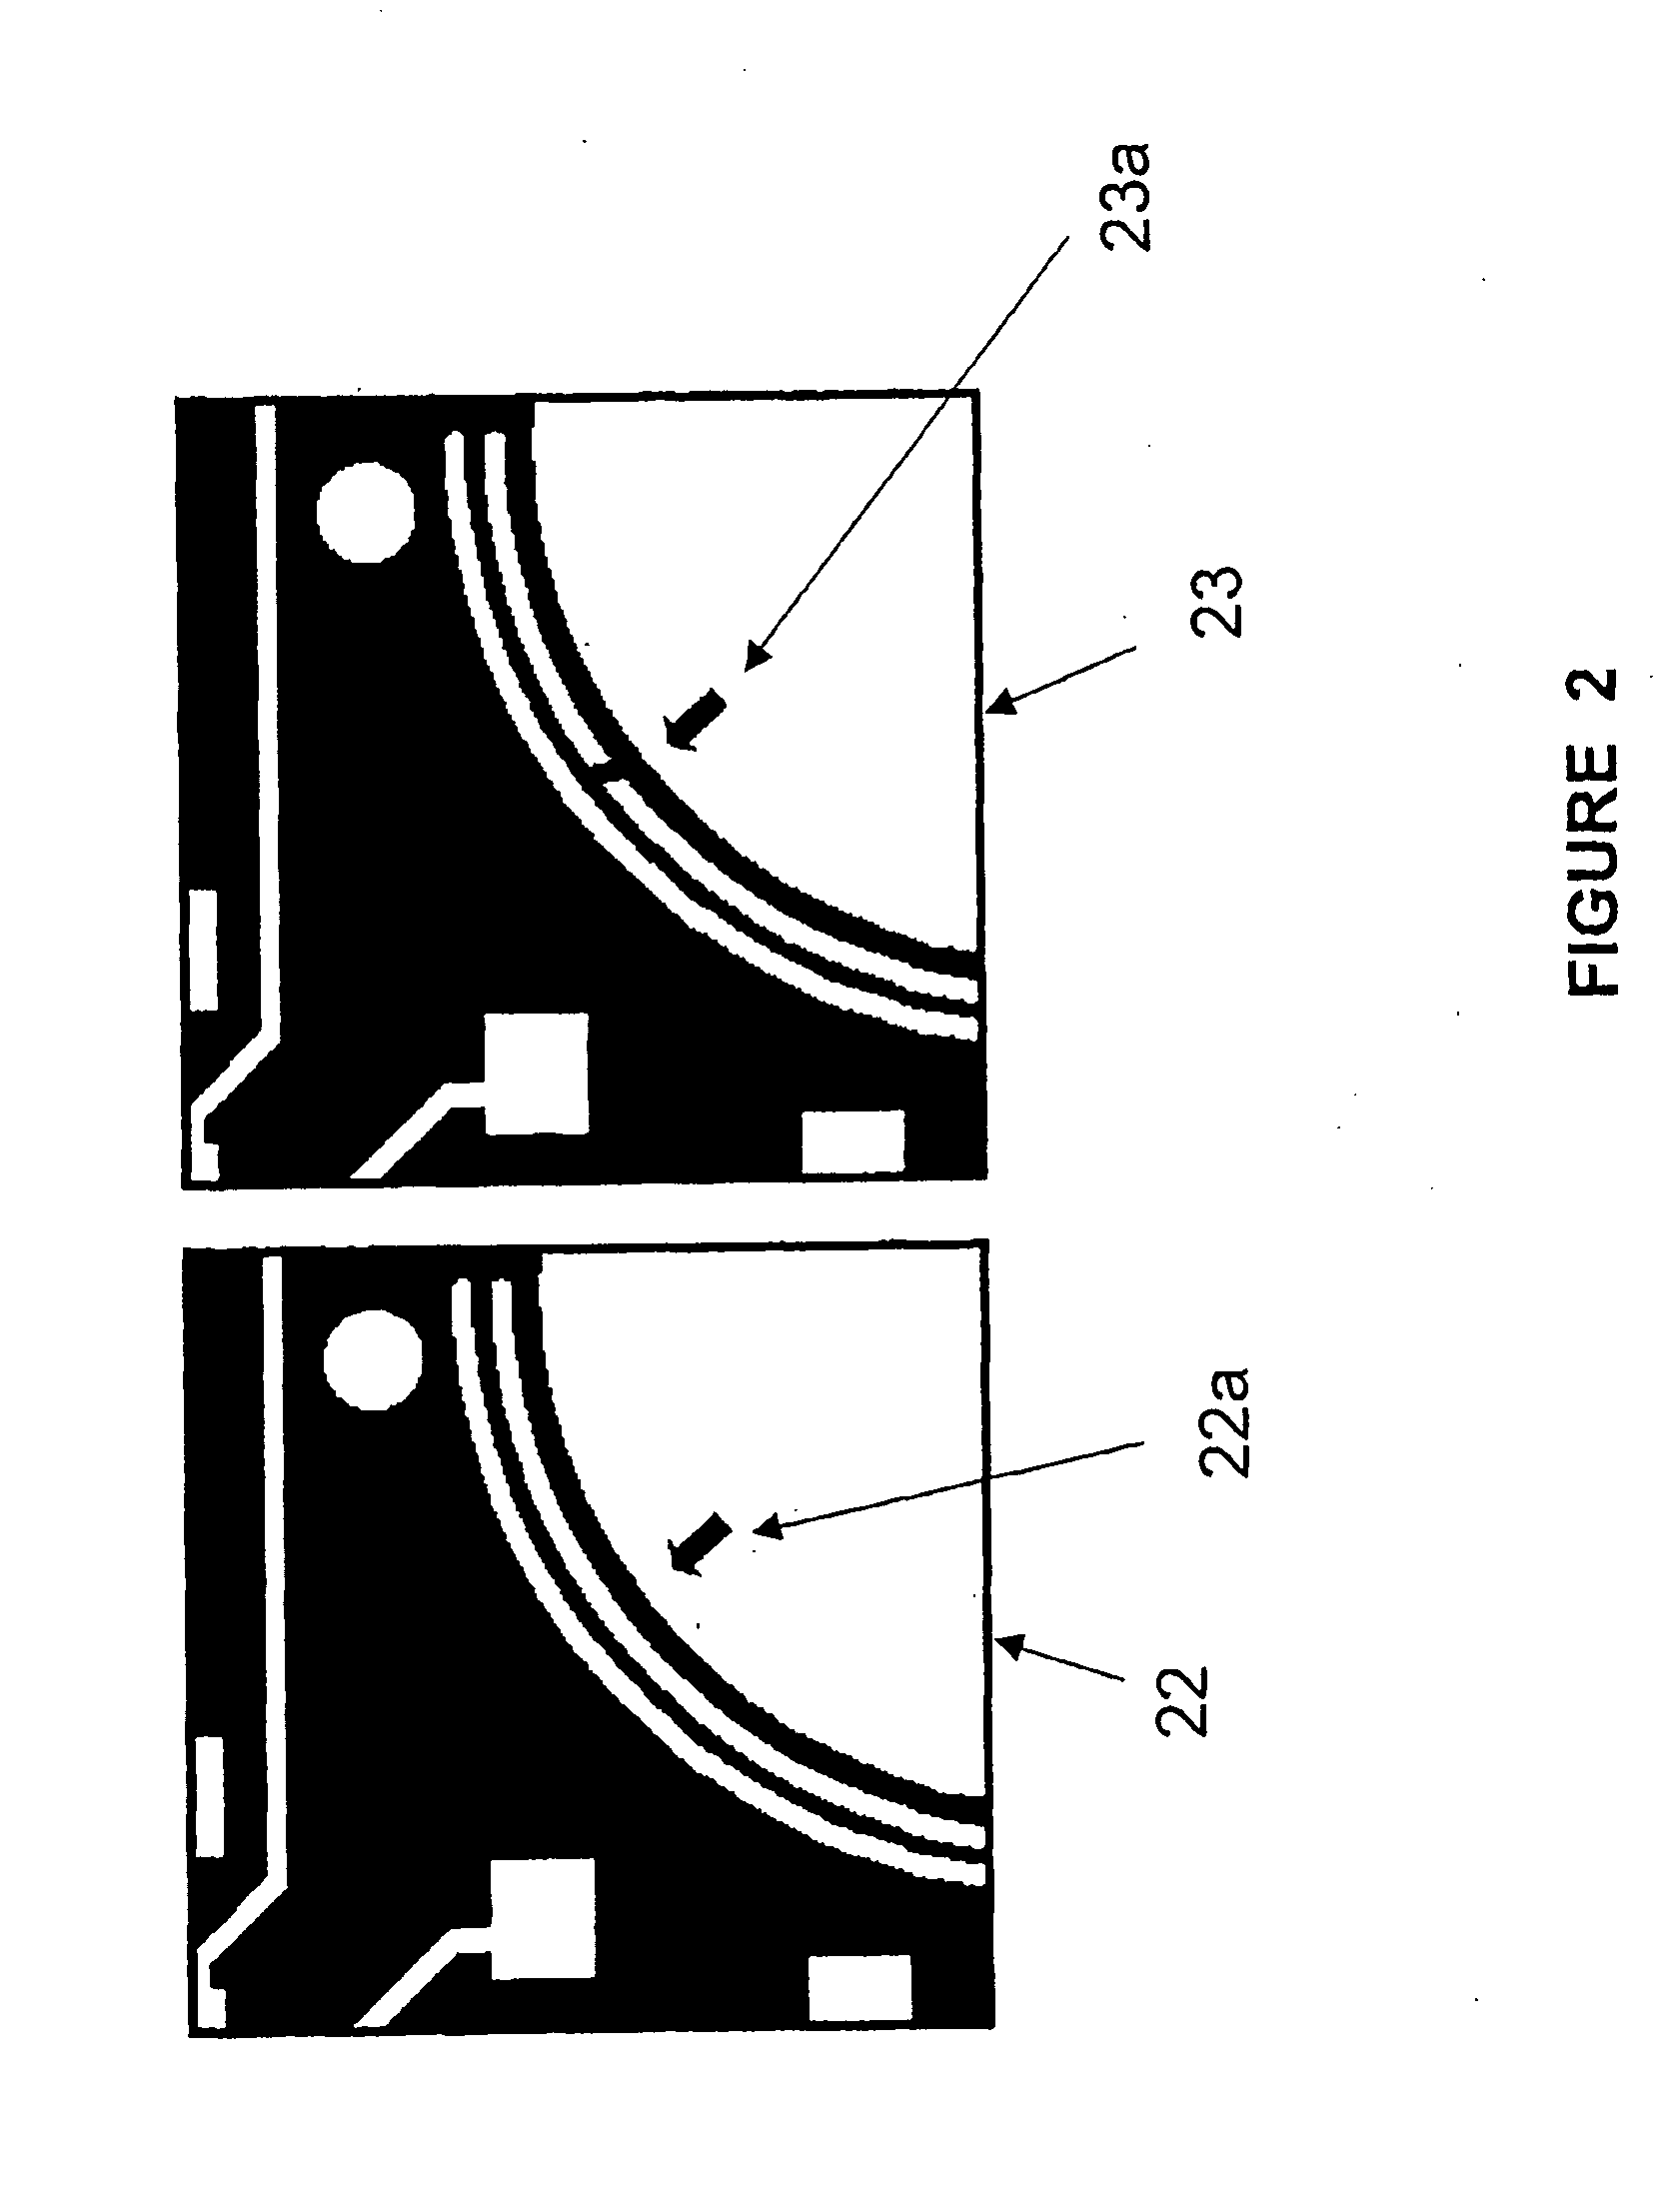 Method and System for Automatic Defect Detection of Articles in Visual Inspection Machines